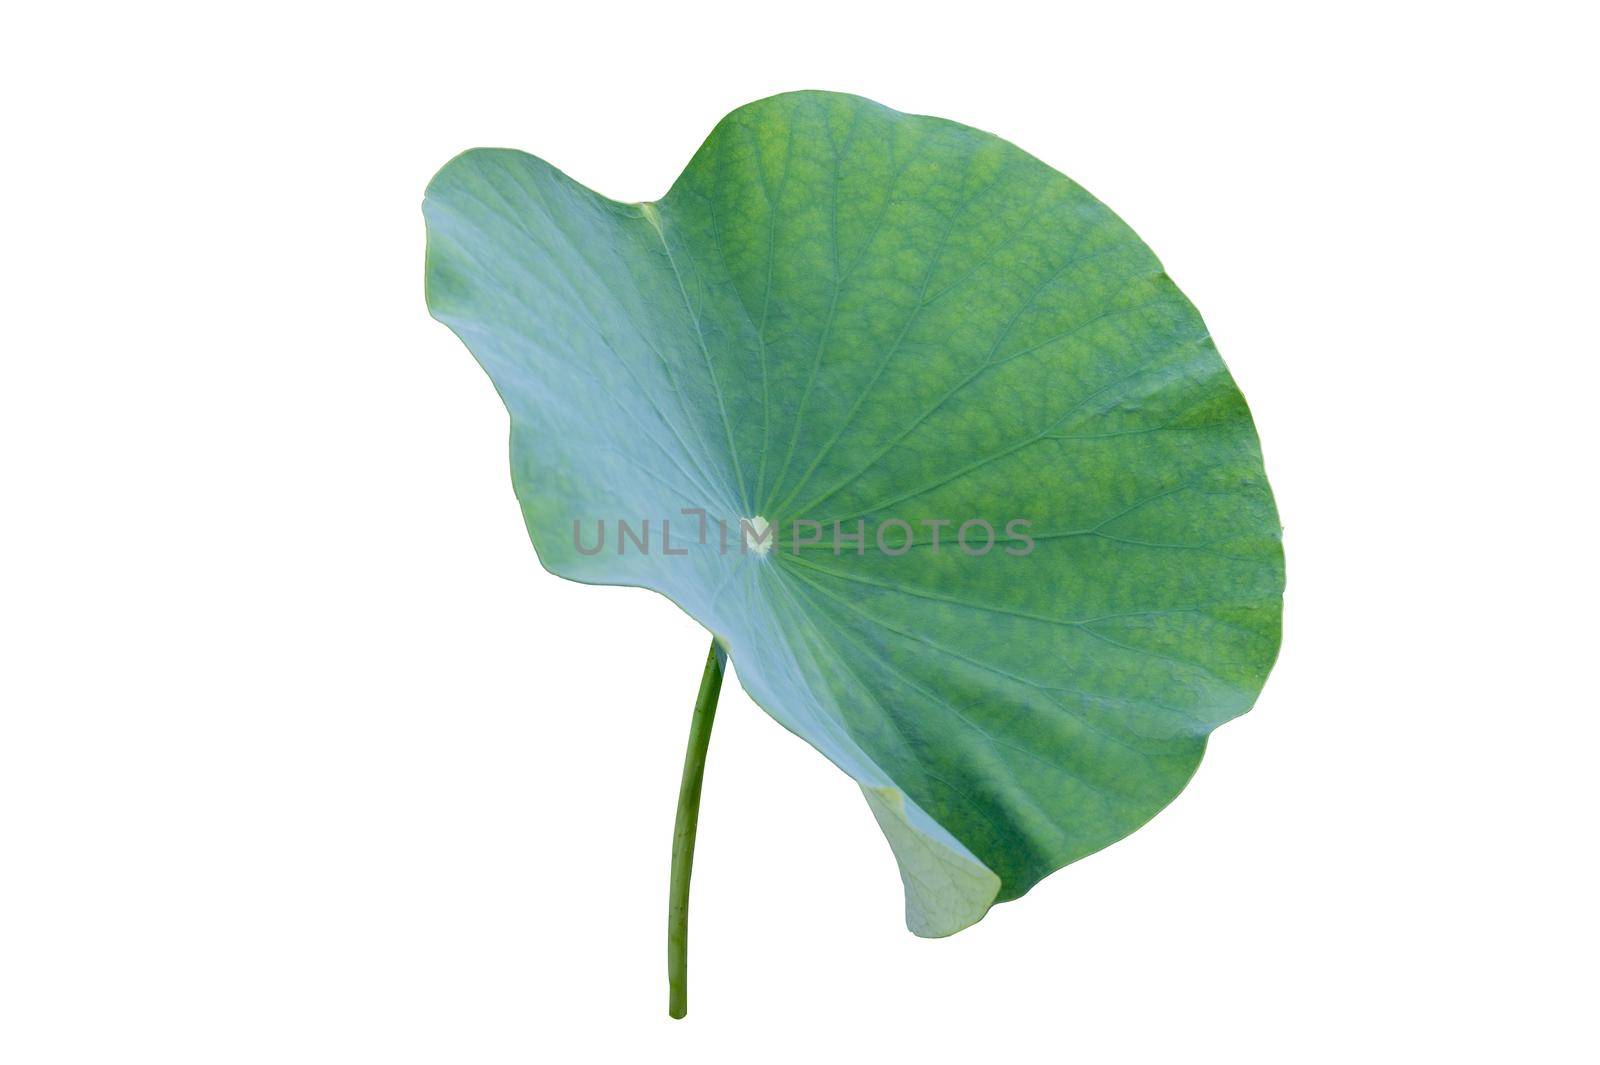 Lotus leaf Isolate collection of white background by sarayut_thaneerat